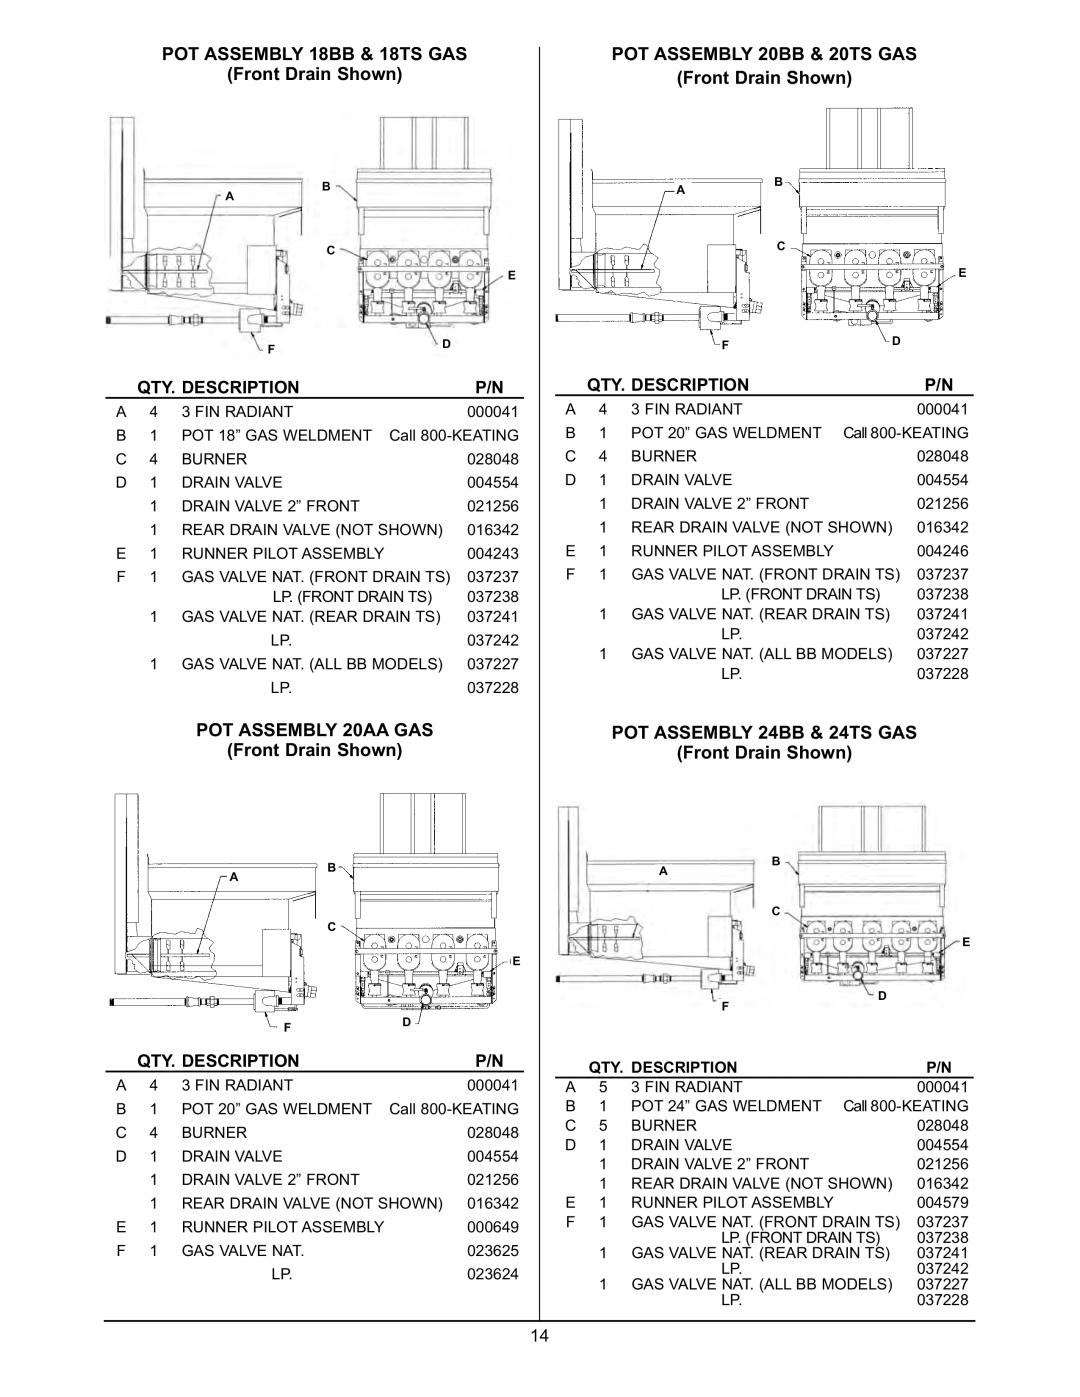 Keating Of Chicago 2000 warranty POT Assembly 18BB & 18TS GAS, POT Assembly 20AA GAS, POT Assembly 20BB & 20TS GAS 